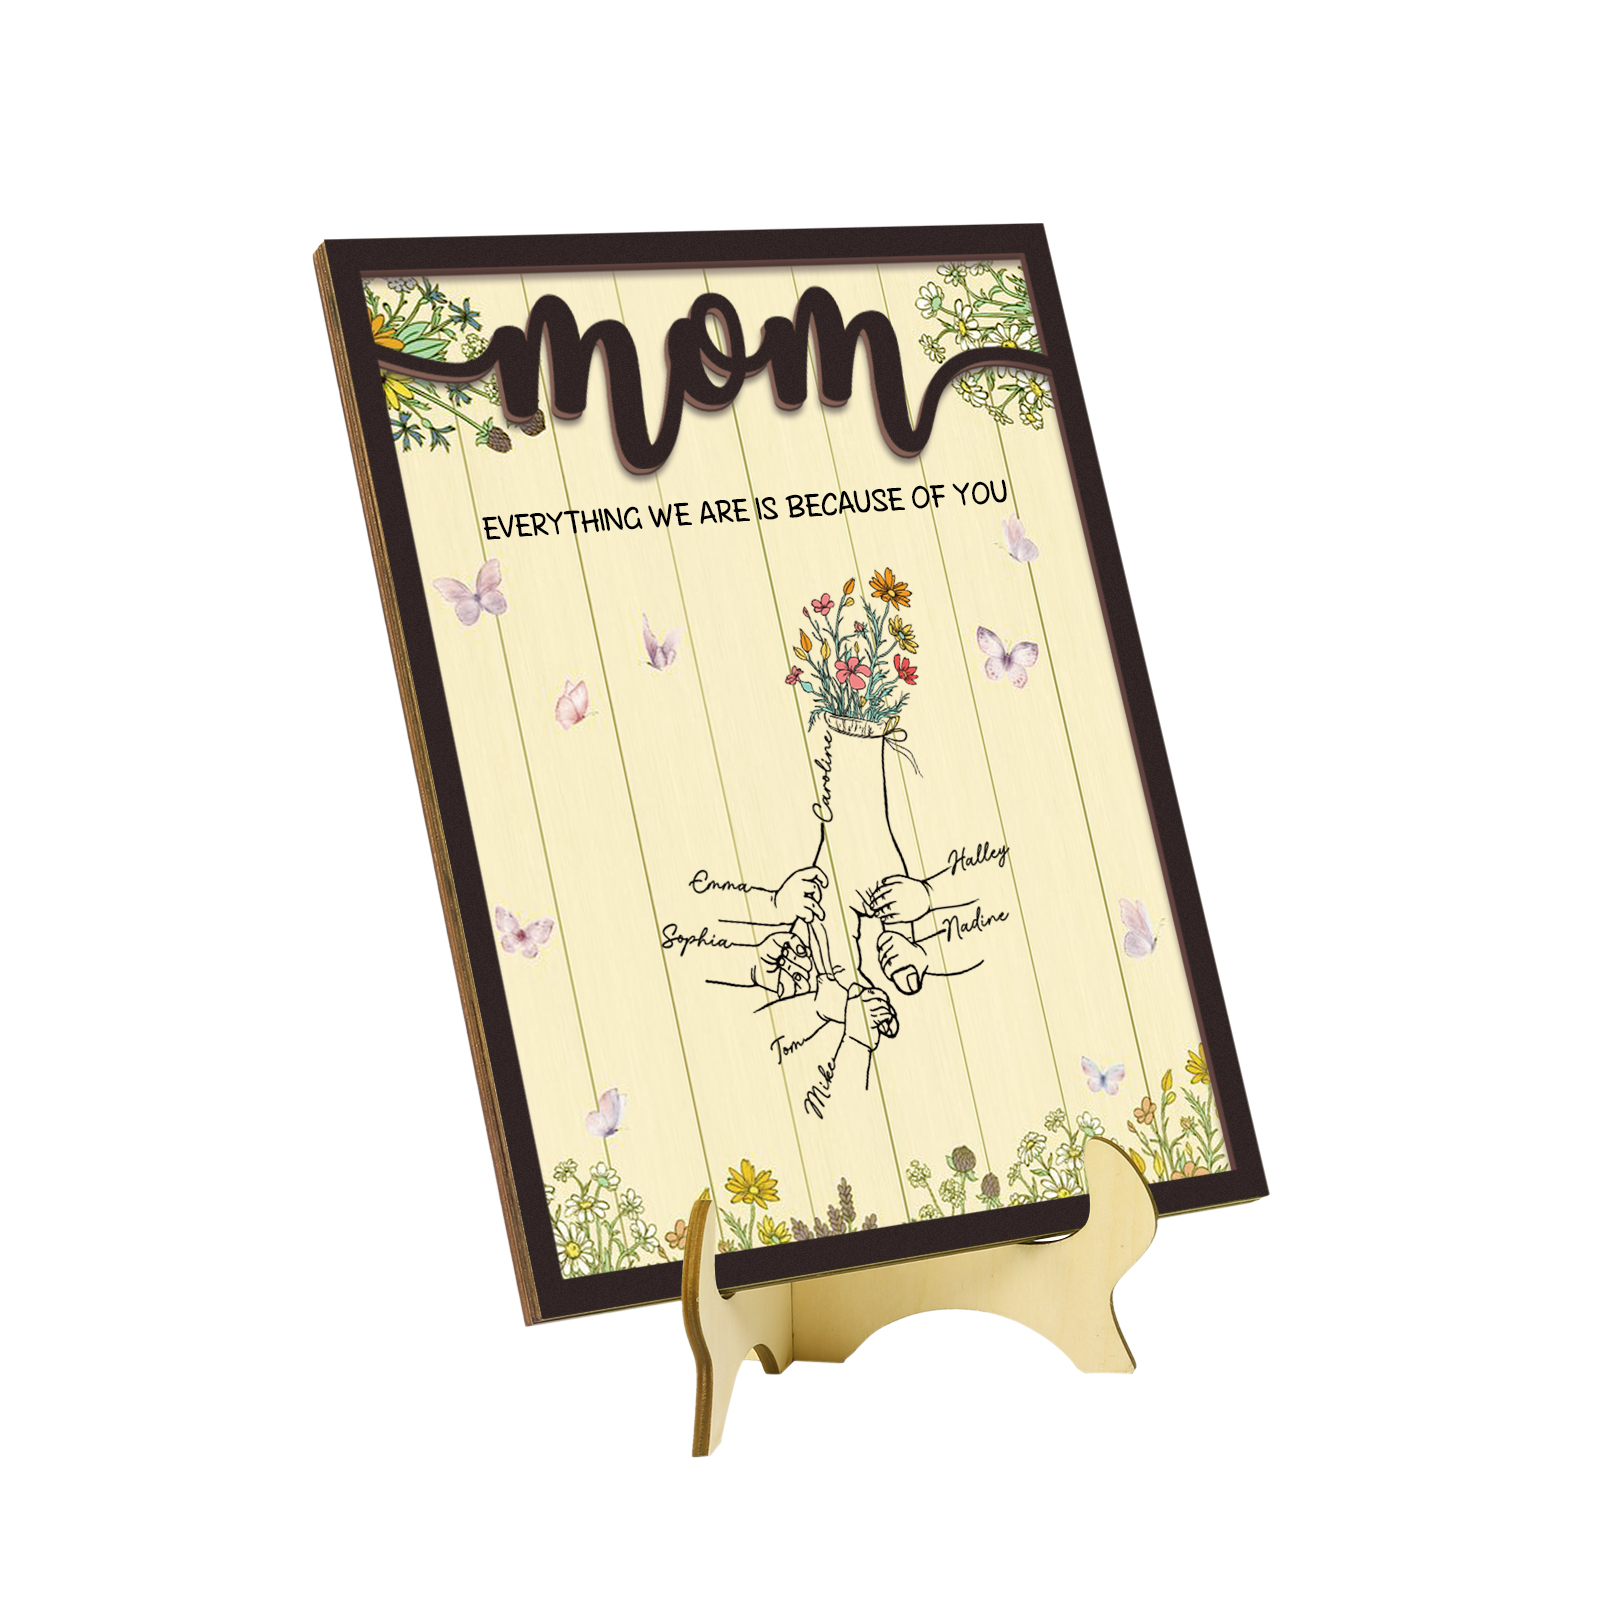 7 Names - Personalized Customizable Text Home Frame Wooden Ornament Holding Hands Flower Elements Style Ornament for Mom